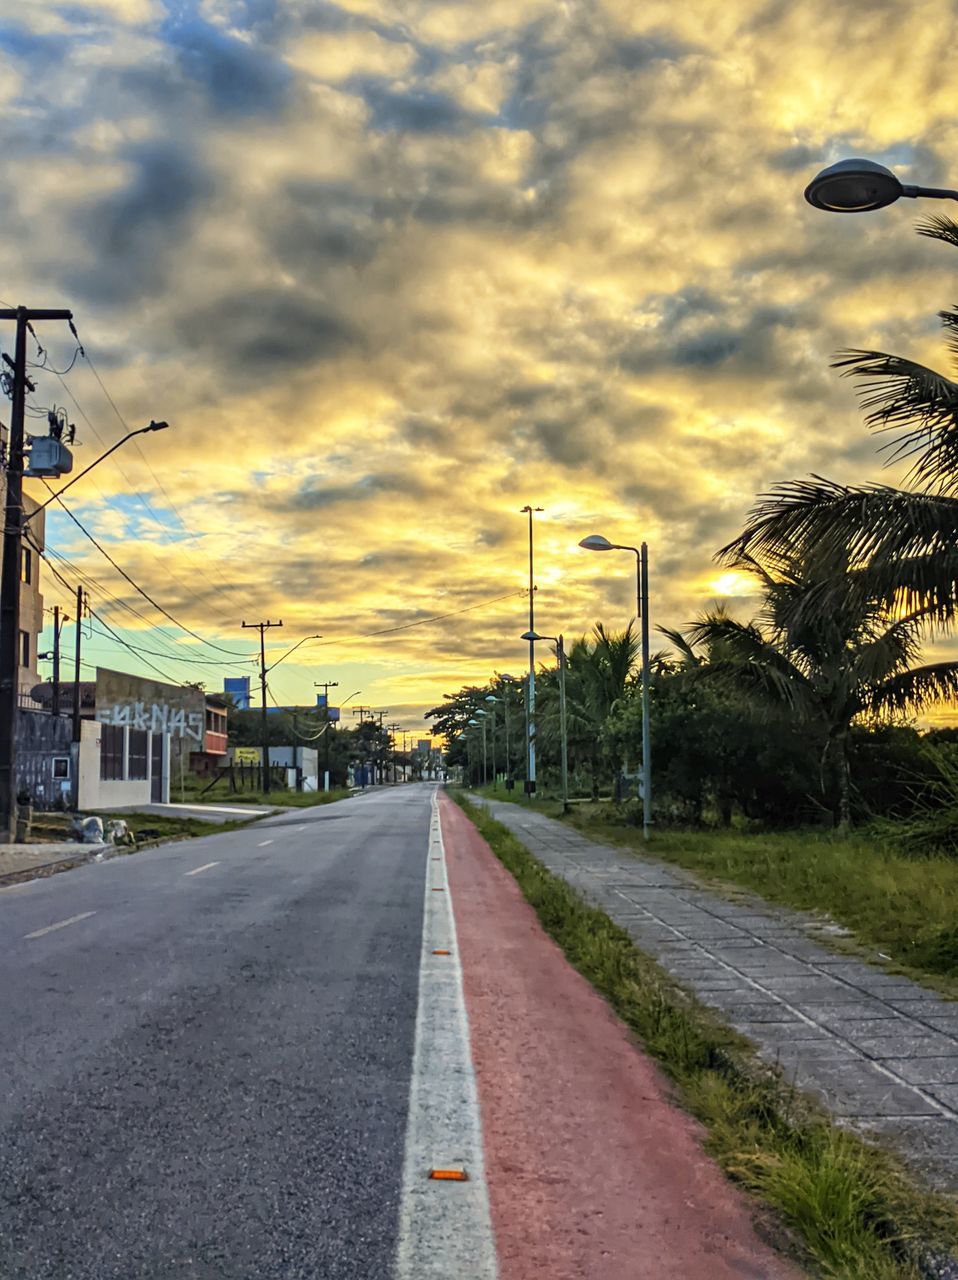 road, sky, cloud, transportation, street, city, the way forward, nature, architecture, morning, street light, sign, no people, built structure, infrastructure, diminishing perspective, lane, building exterior, vanishing point, tree, urban area, outdoors, road marking, mode of transportation, marking, symbol, road surface, plant, sunlight, dramatic sky, car, travel destinations